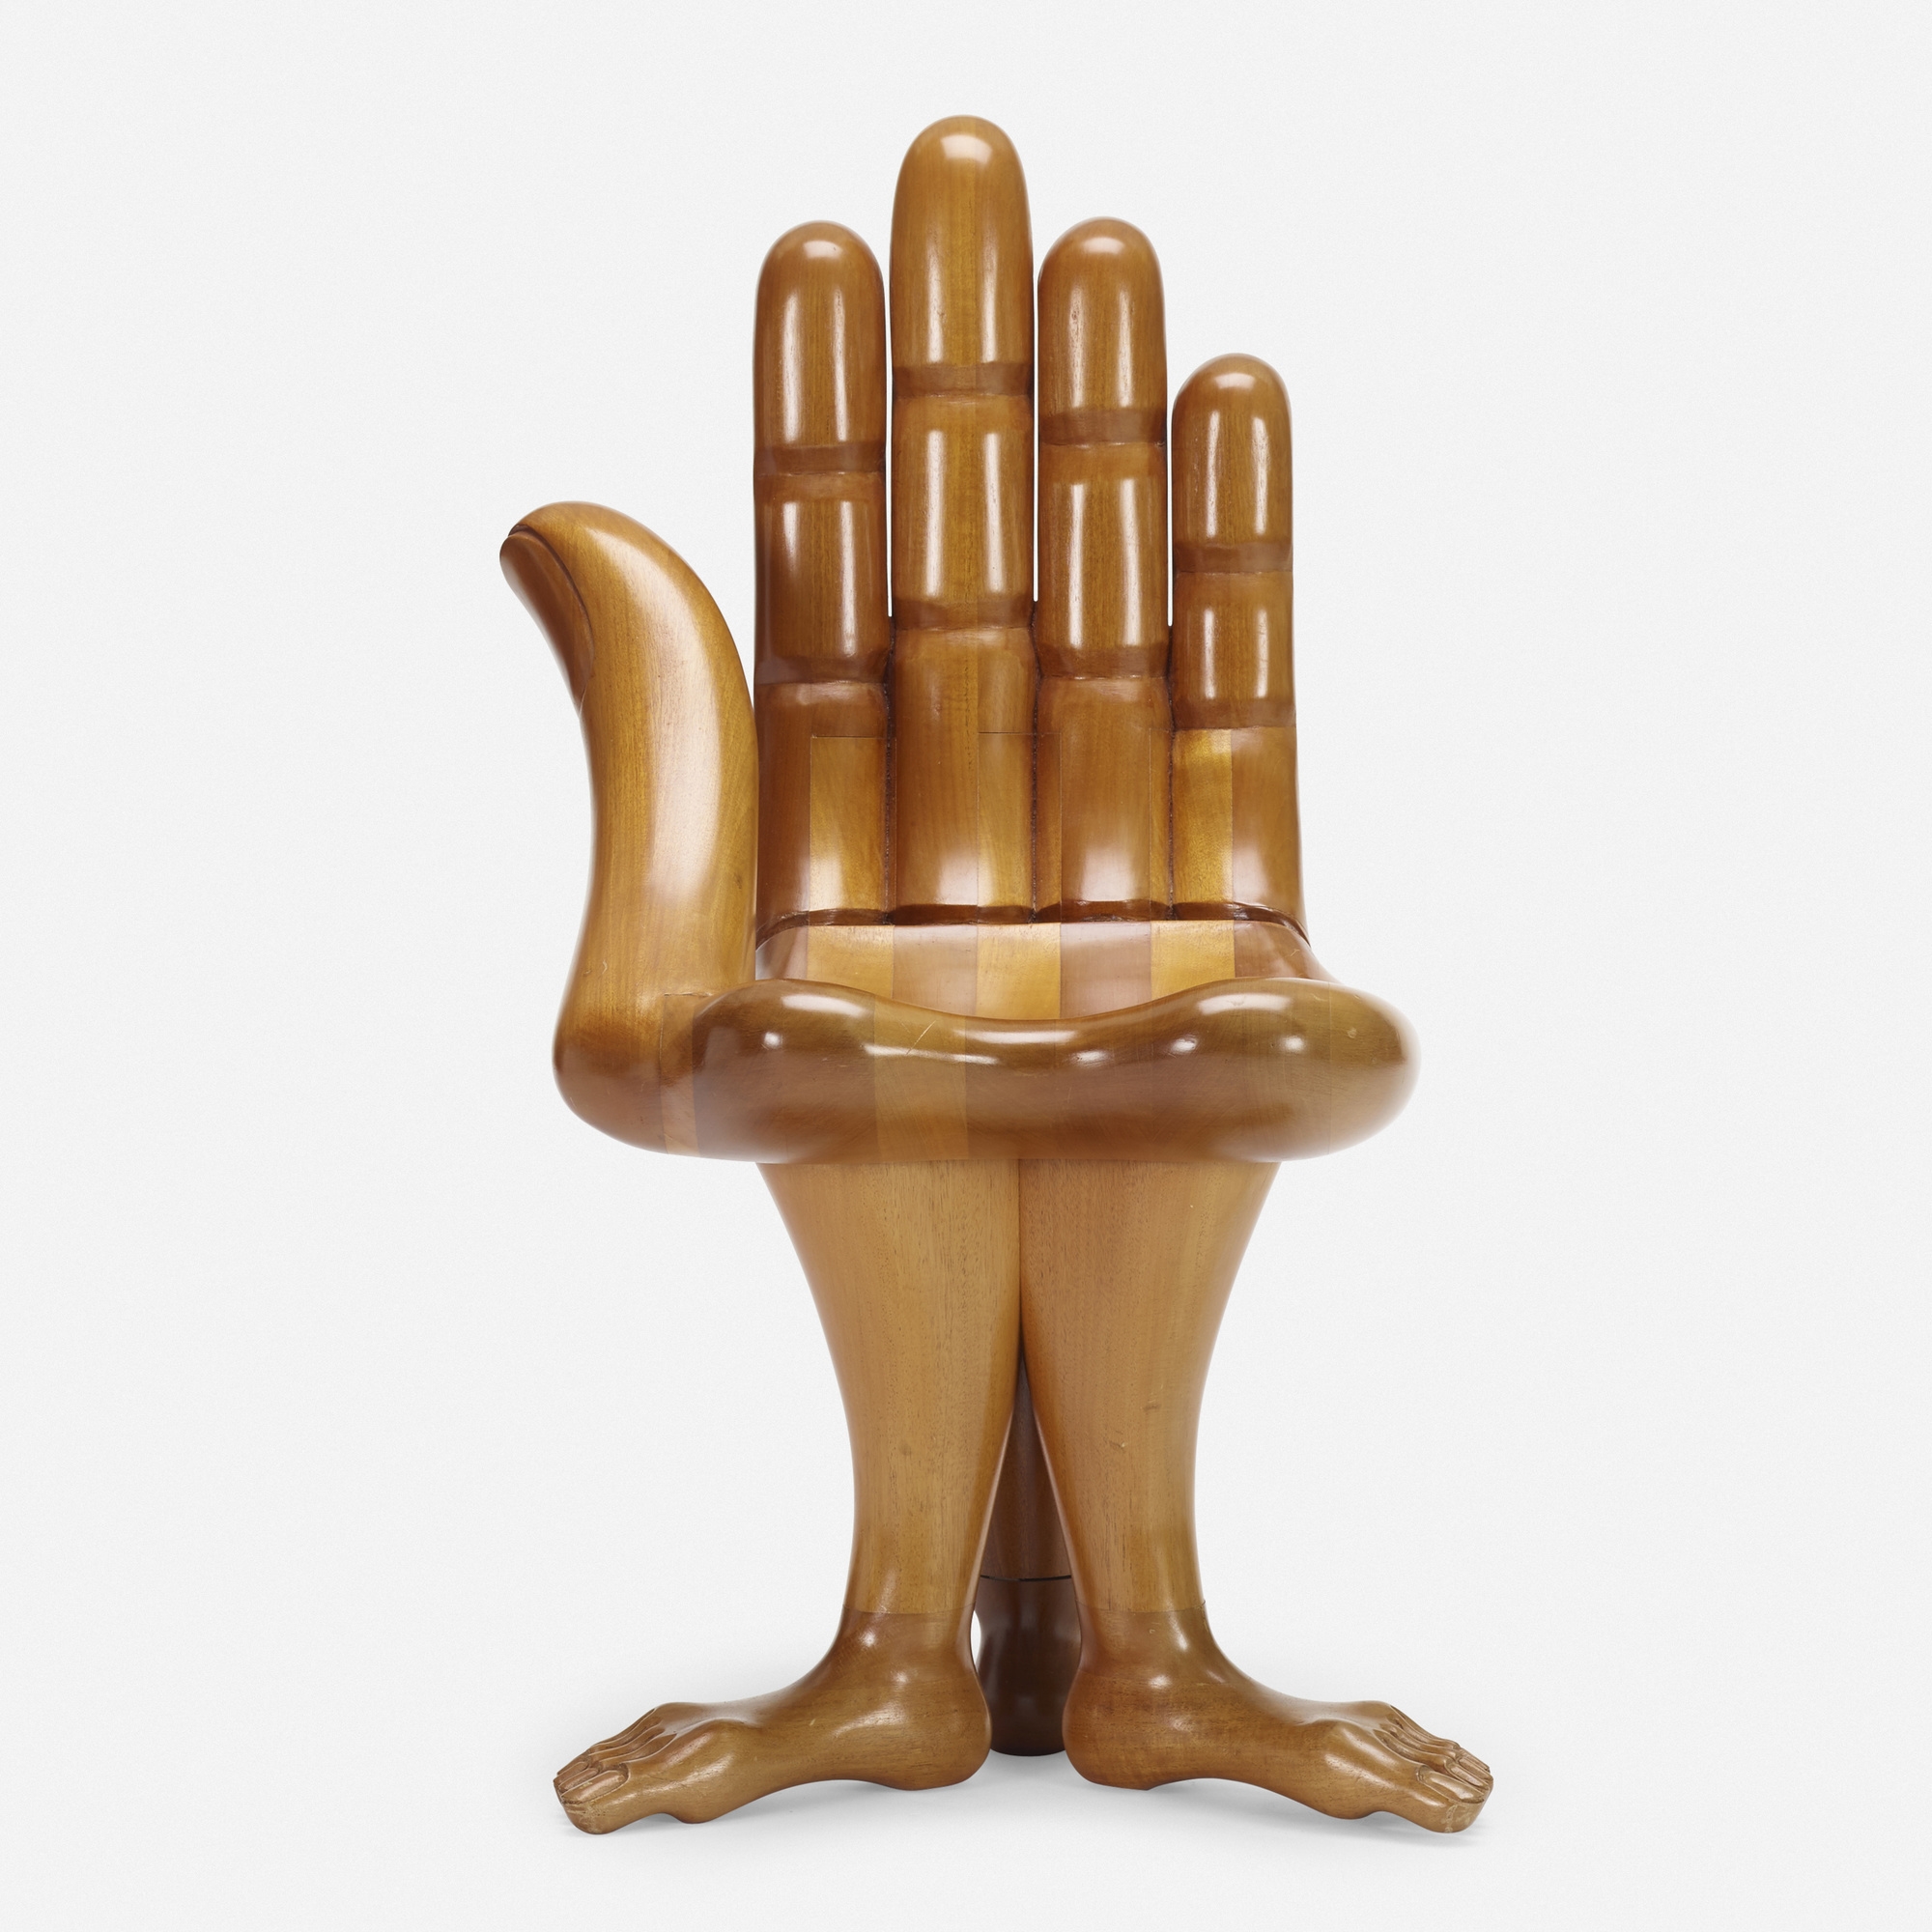 Hand Foot chair by Pedro Friedeberg, circa 1975